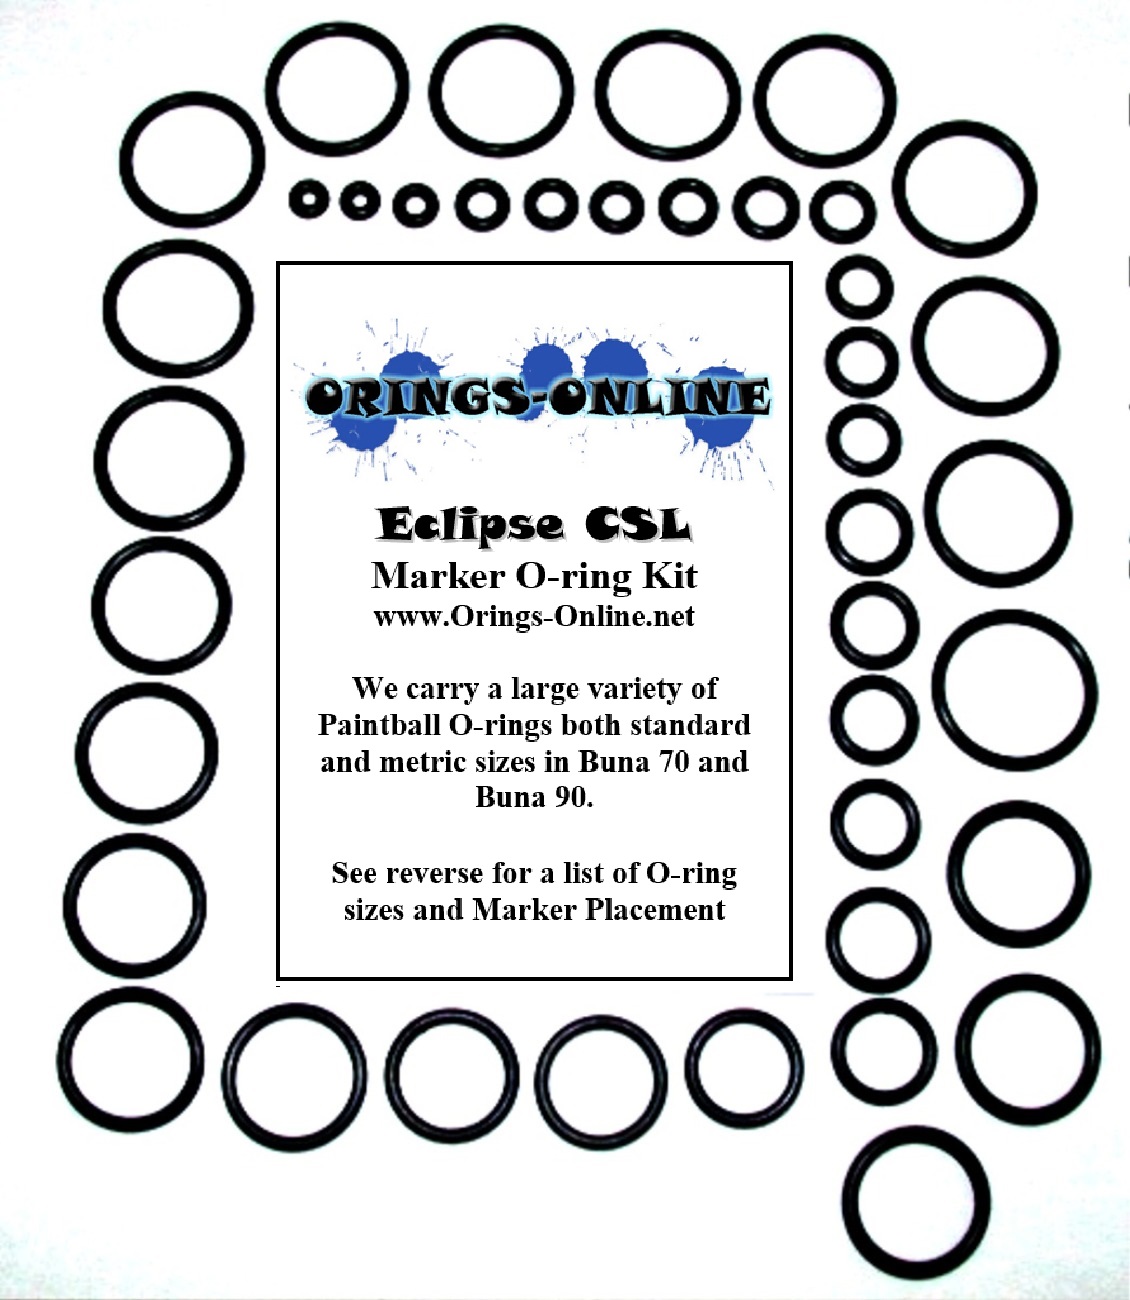 Planet Eclipse CSL Marker O-ring Kit